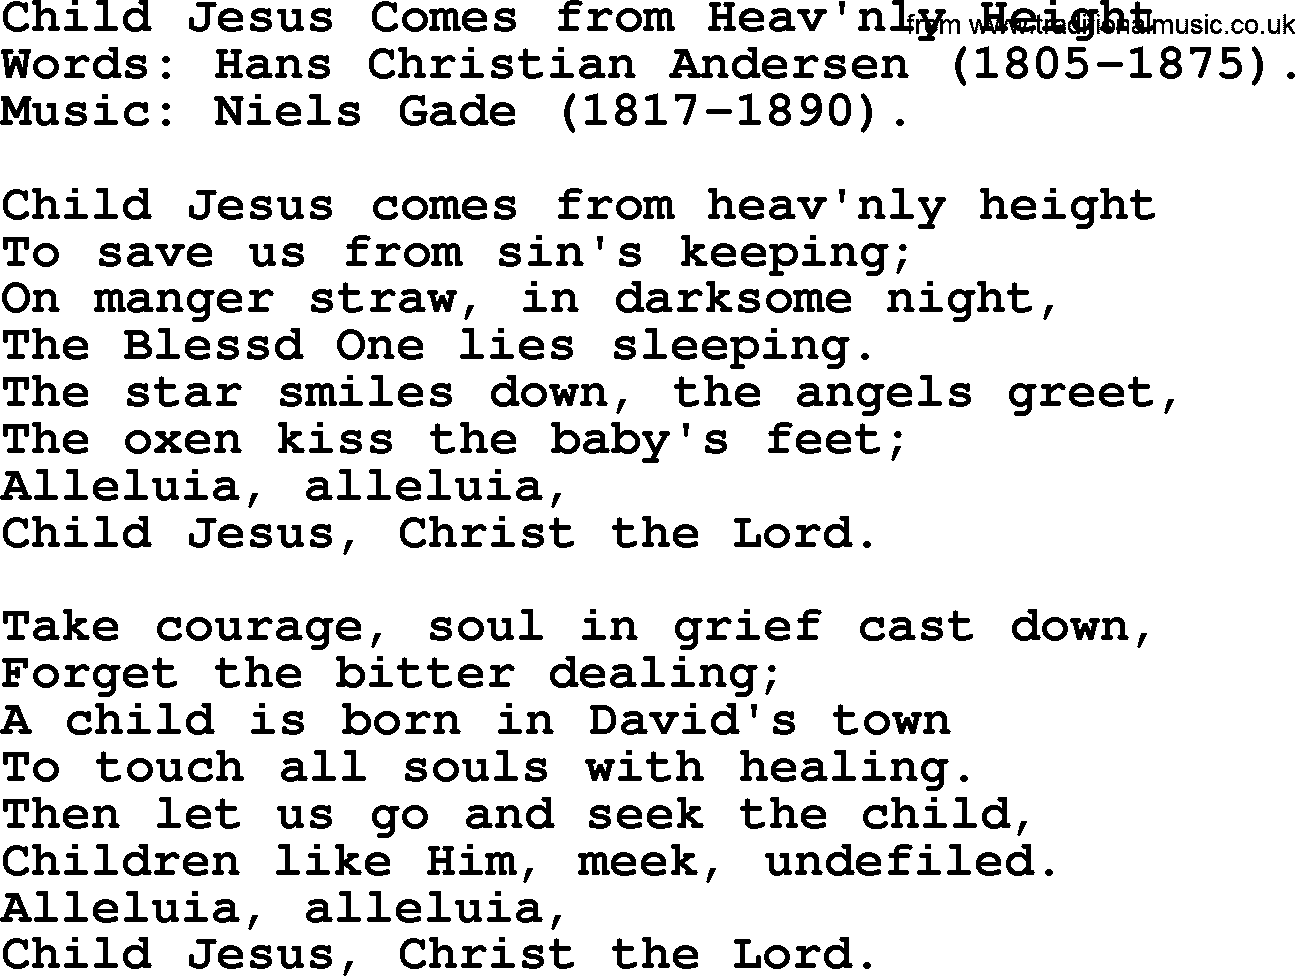 Christmas Hymns, Carols and Songs, title: Child Jesus Comes From Heav'nly Height, lyrics with PDF